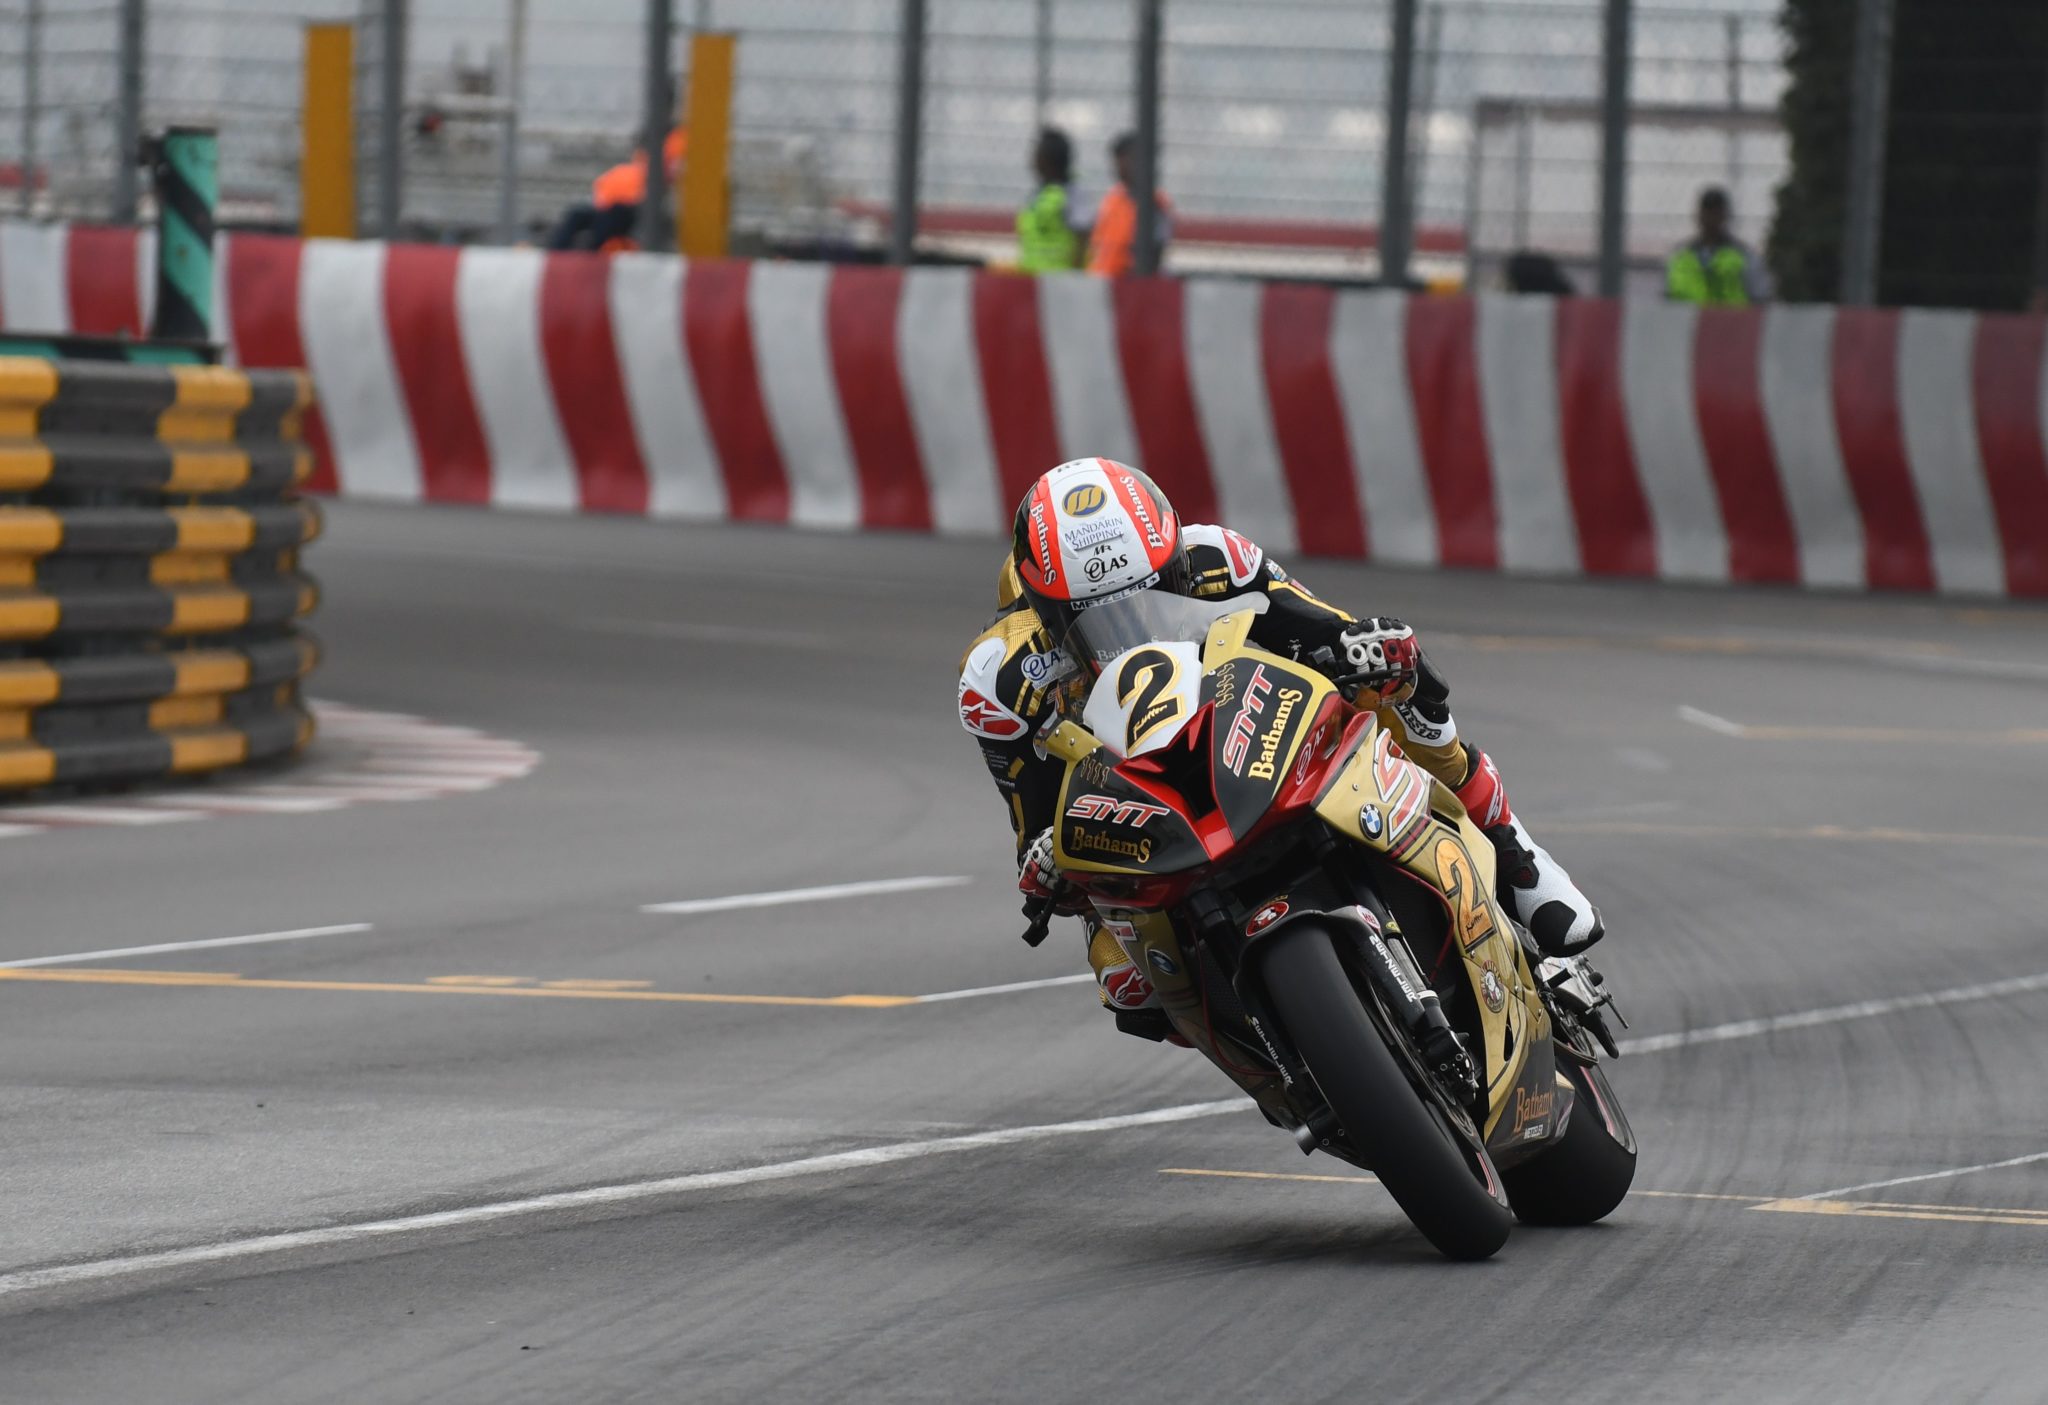 Rutter aims to get the better of Hickman credit Pacemaker Press International.